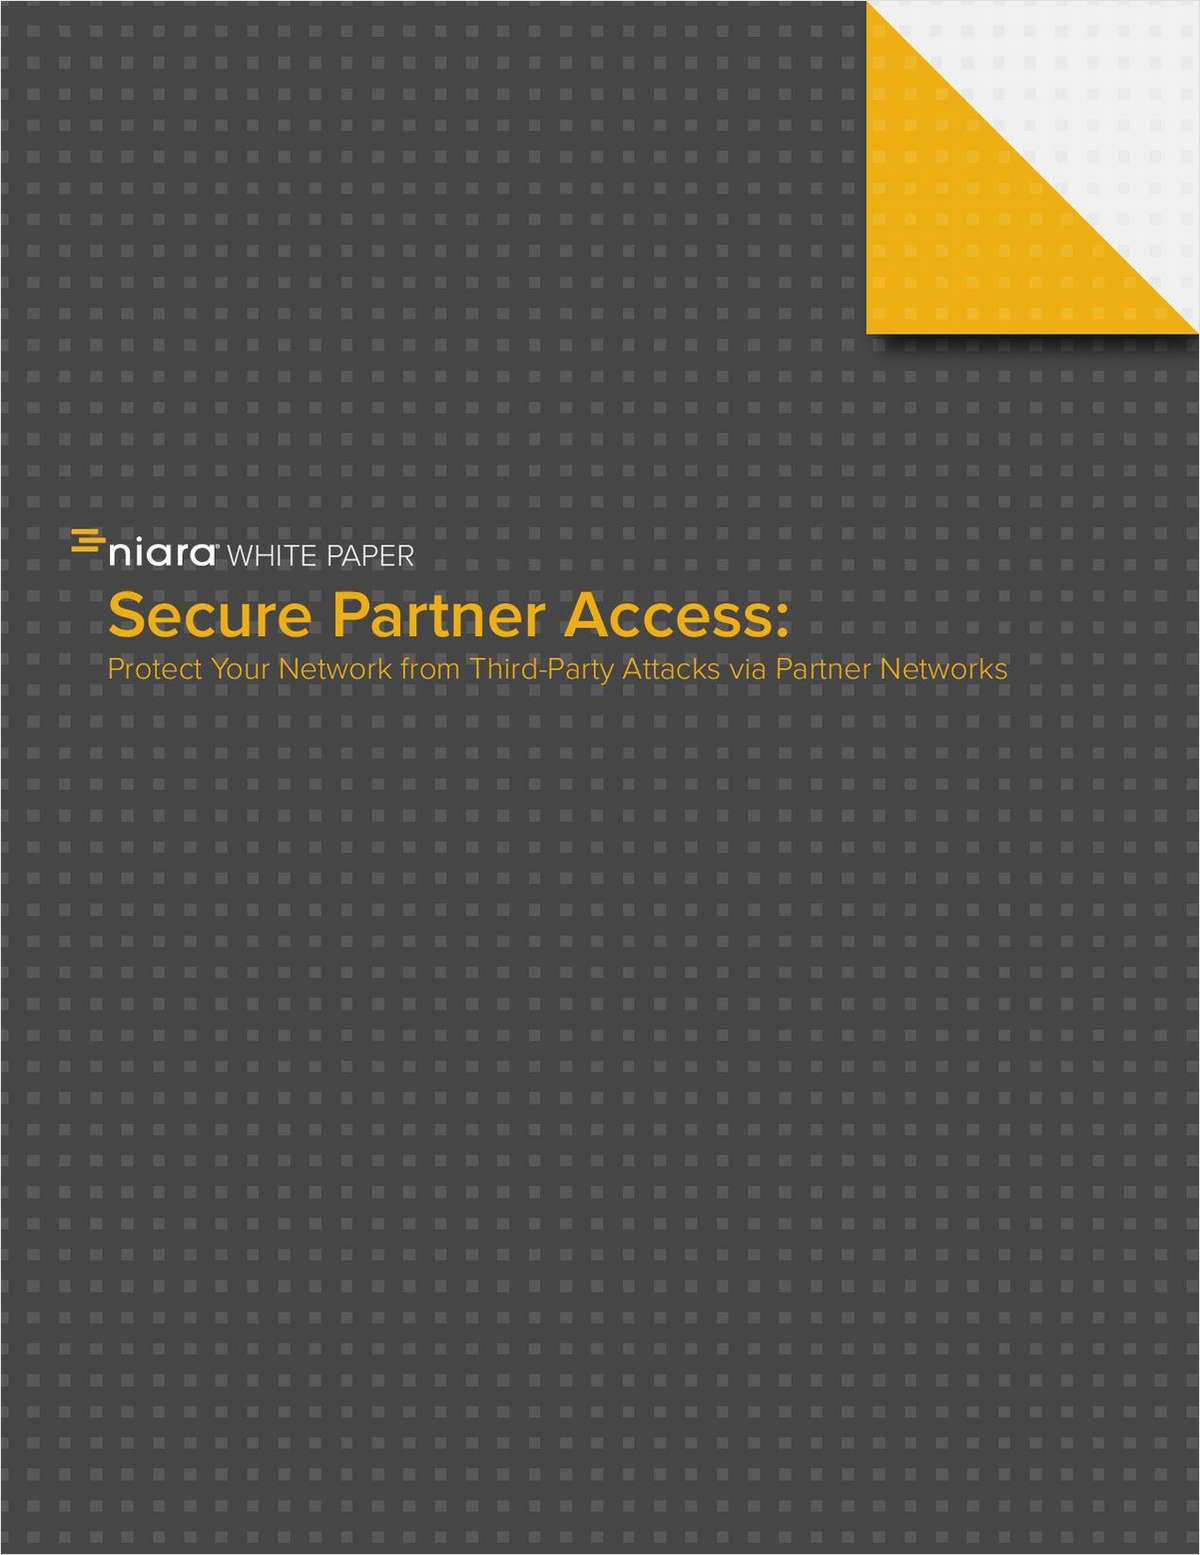 Secure Partner Access: Protect Your Network from Third-Party Attacks via Partner Networks